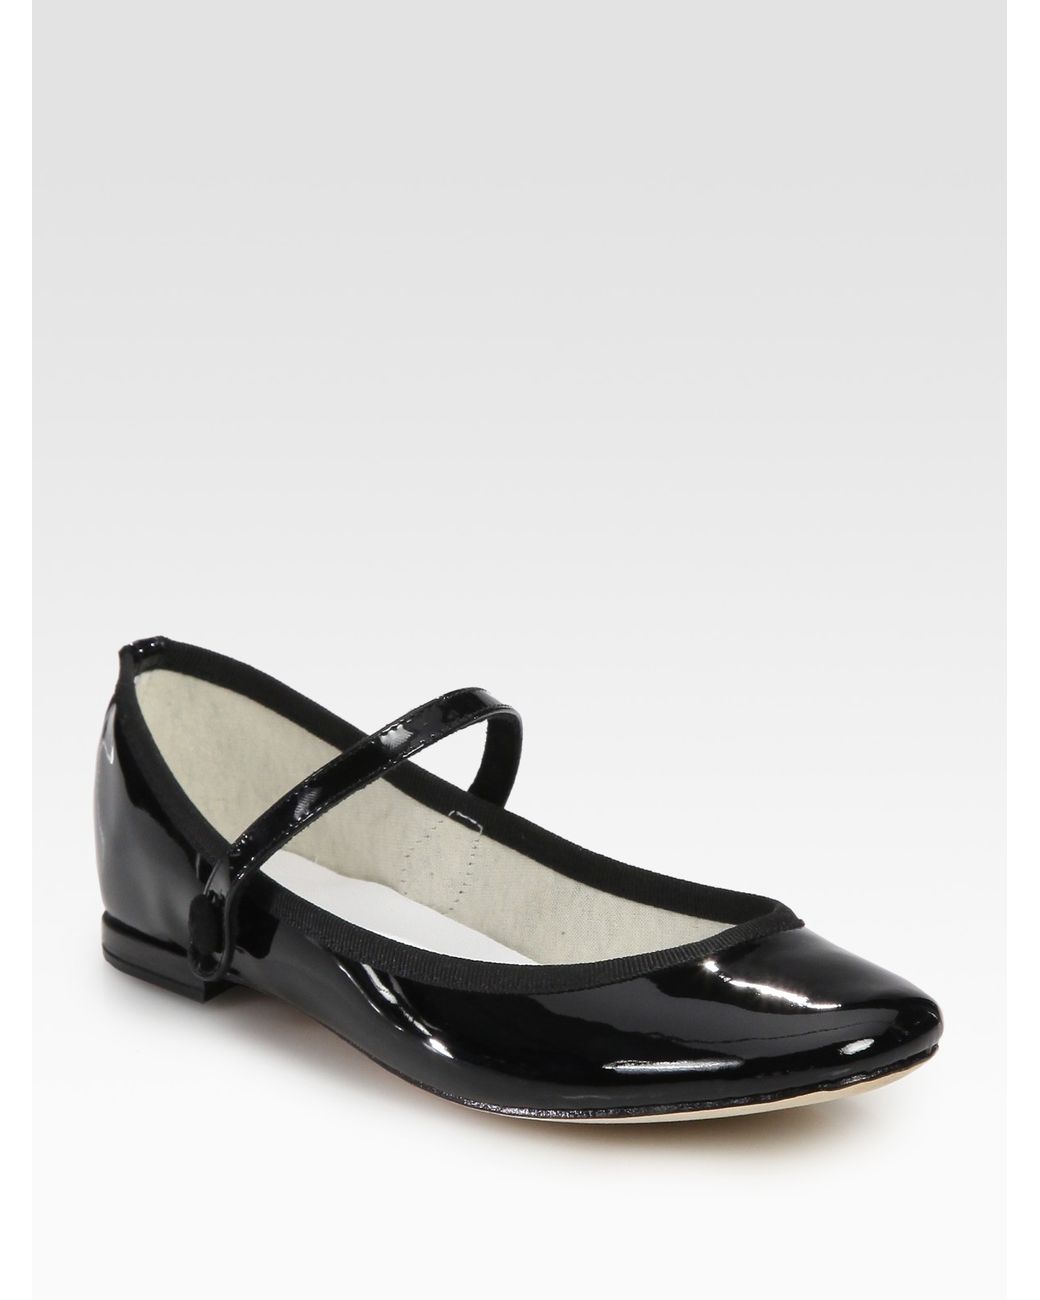 Repetto Lio Patent Leather Mary Jane Ballet Flats in Black   Lyst